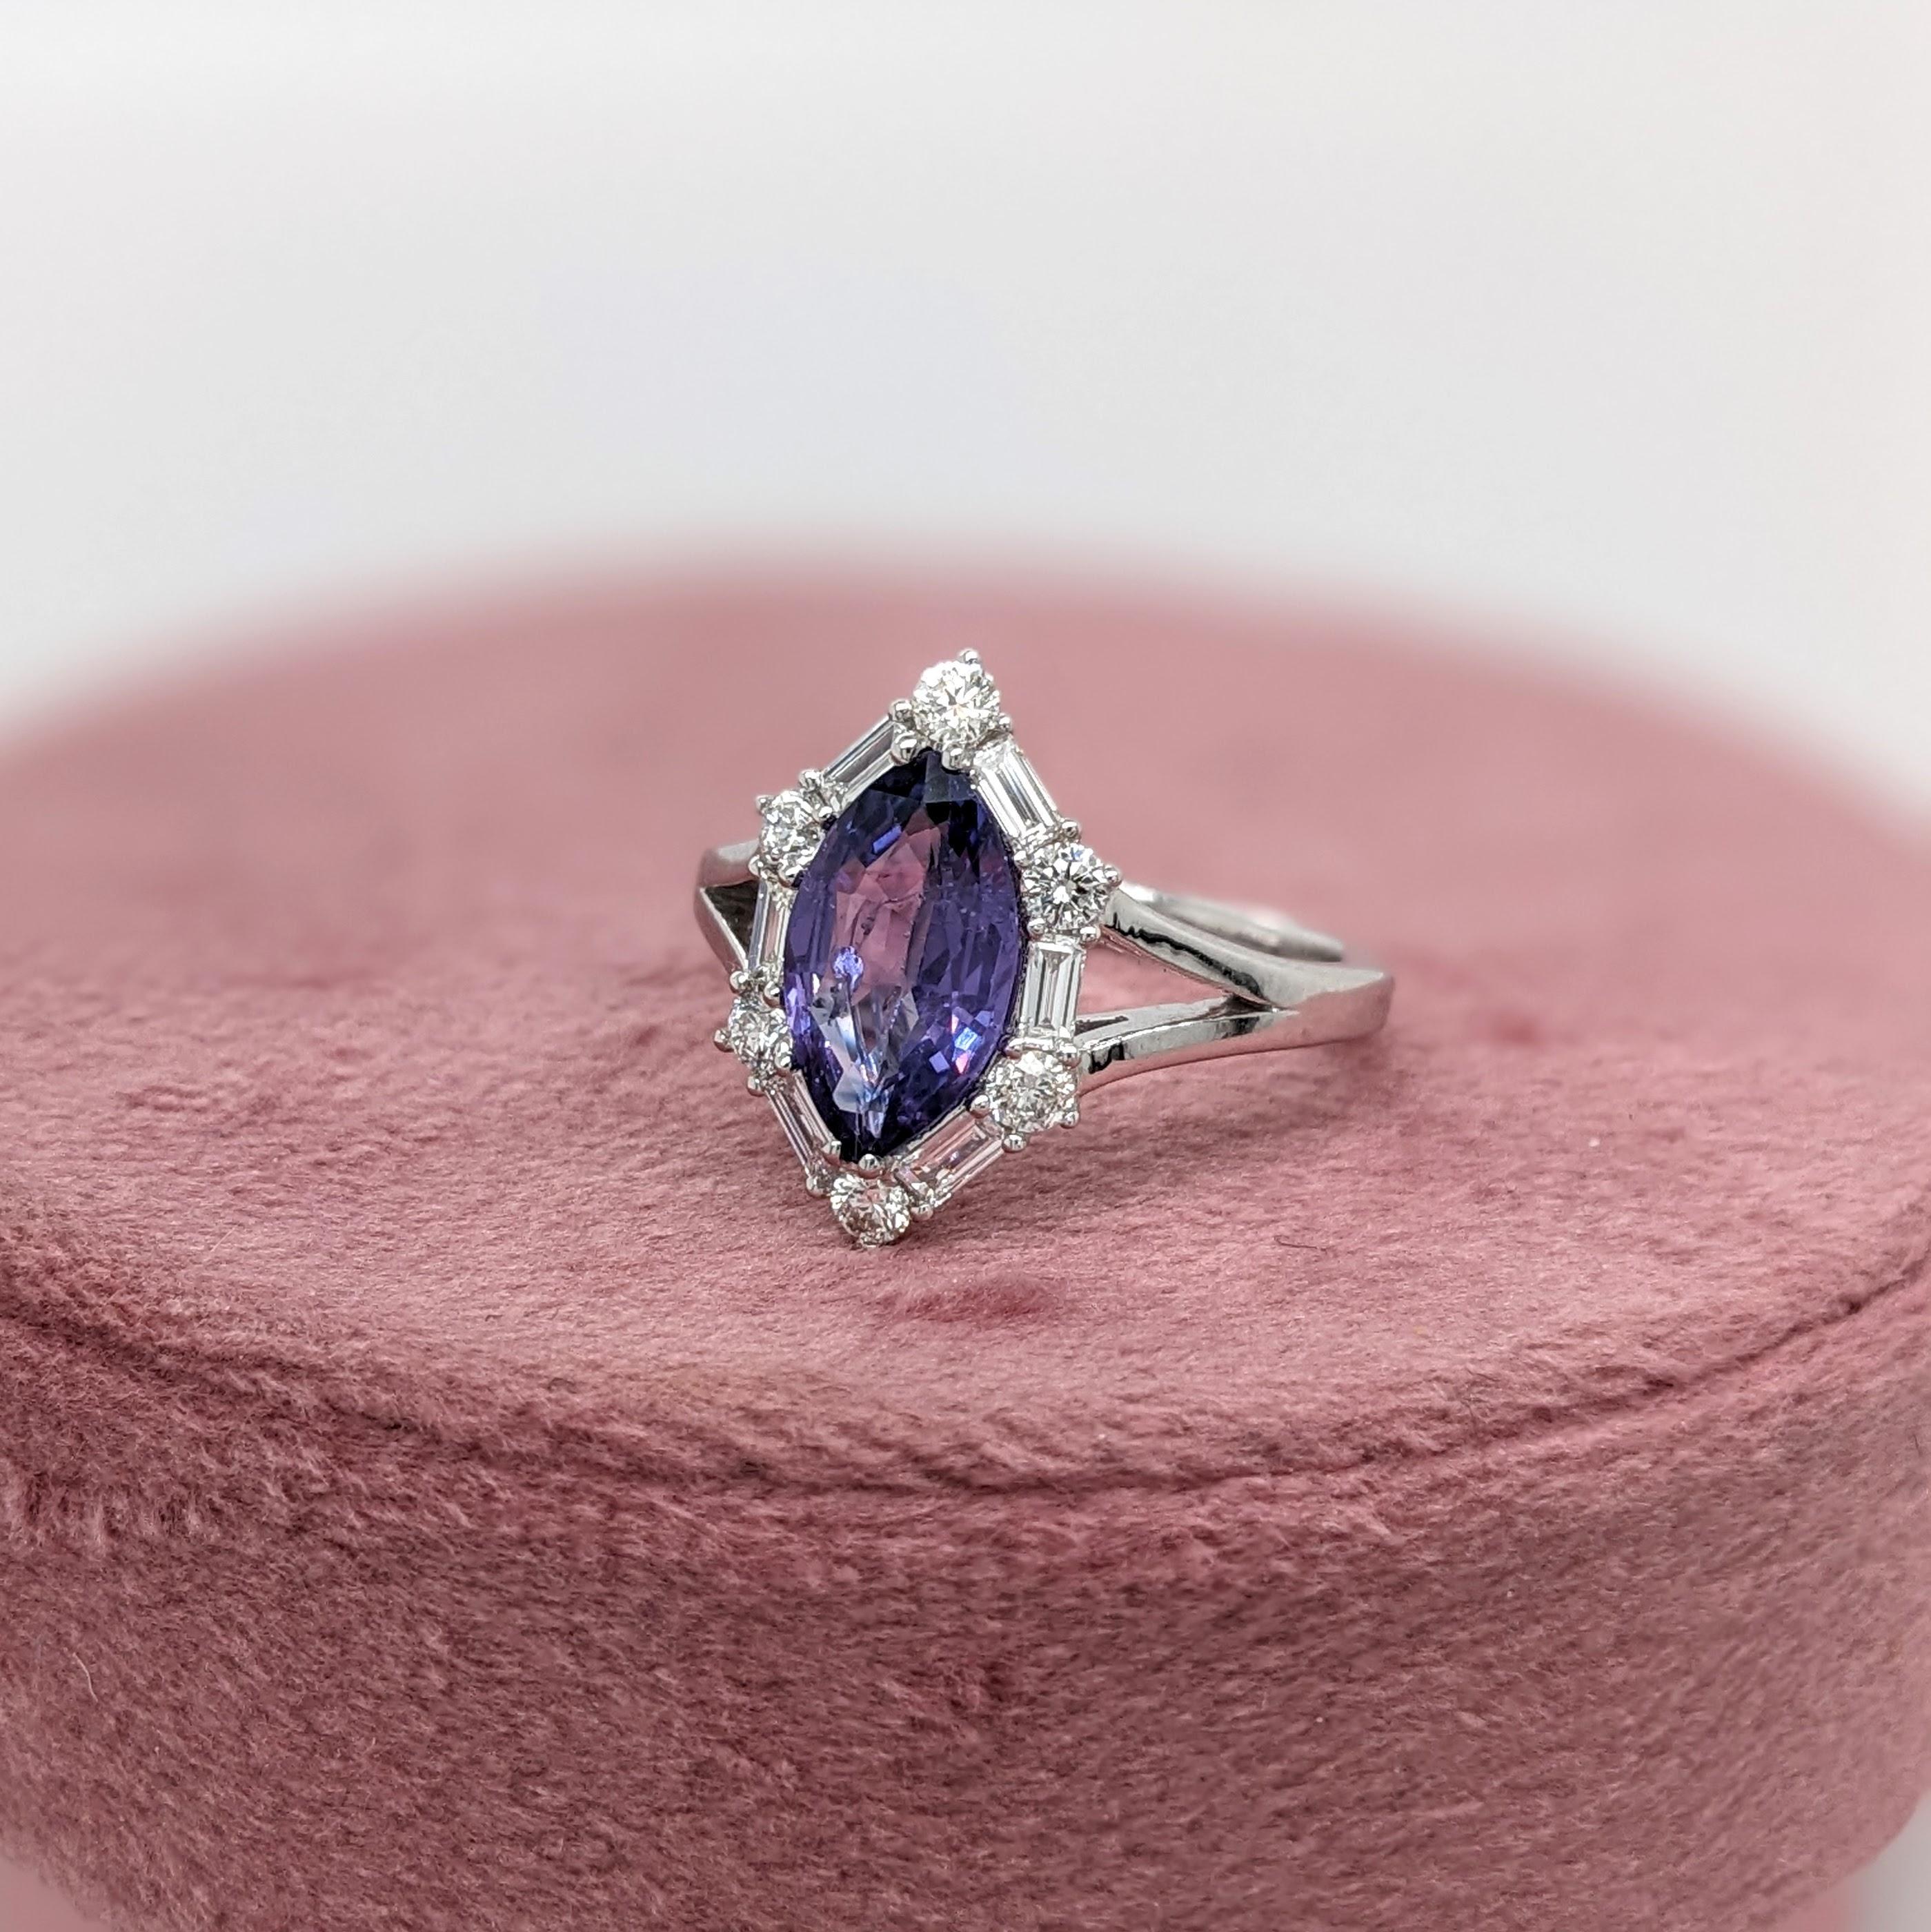 2ct Purple Sapphire Ring w Earth Mined Diamonds in Solid 14K Gold MQ 11x6.5mm For Sale 2